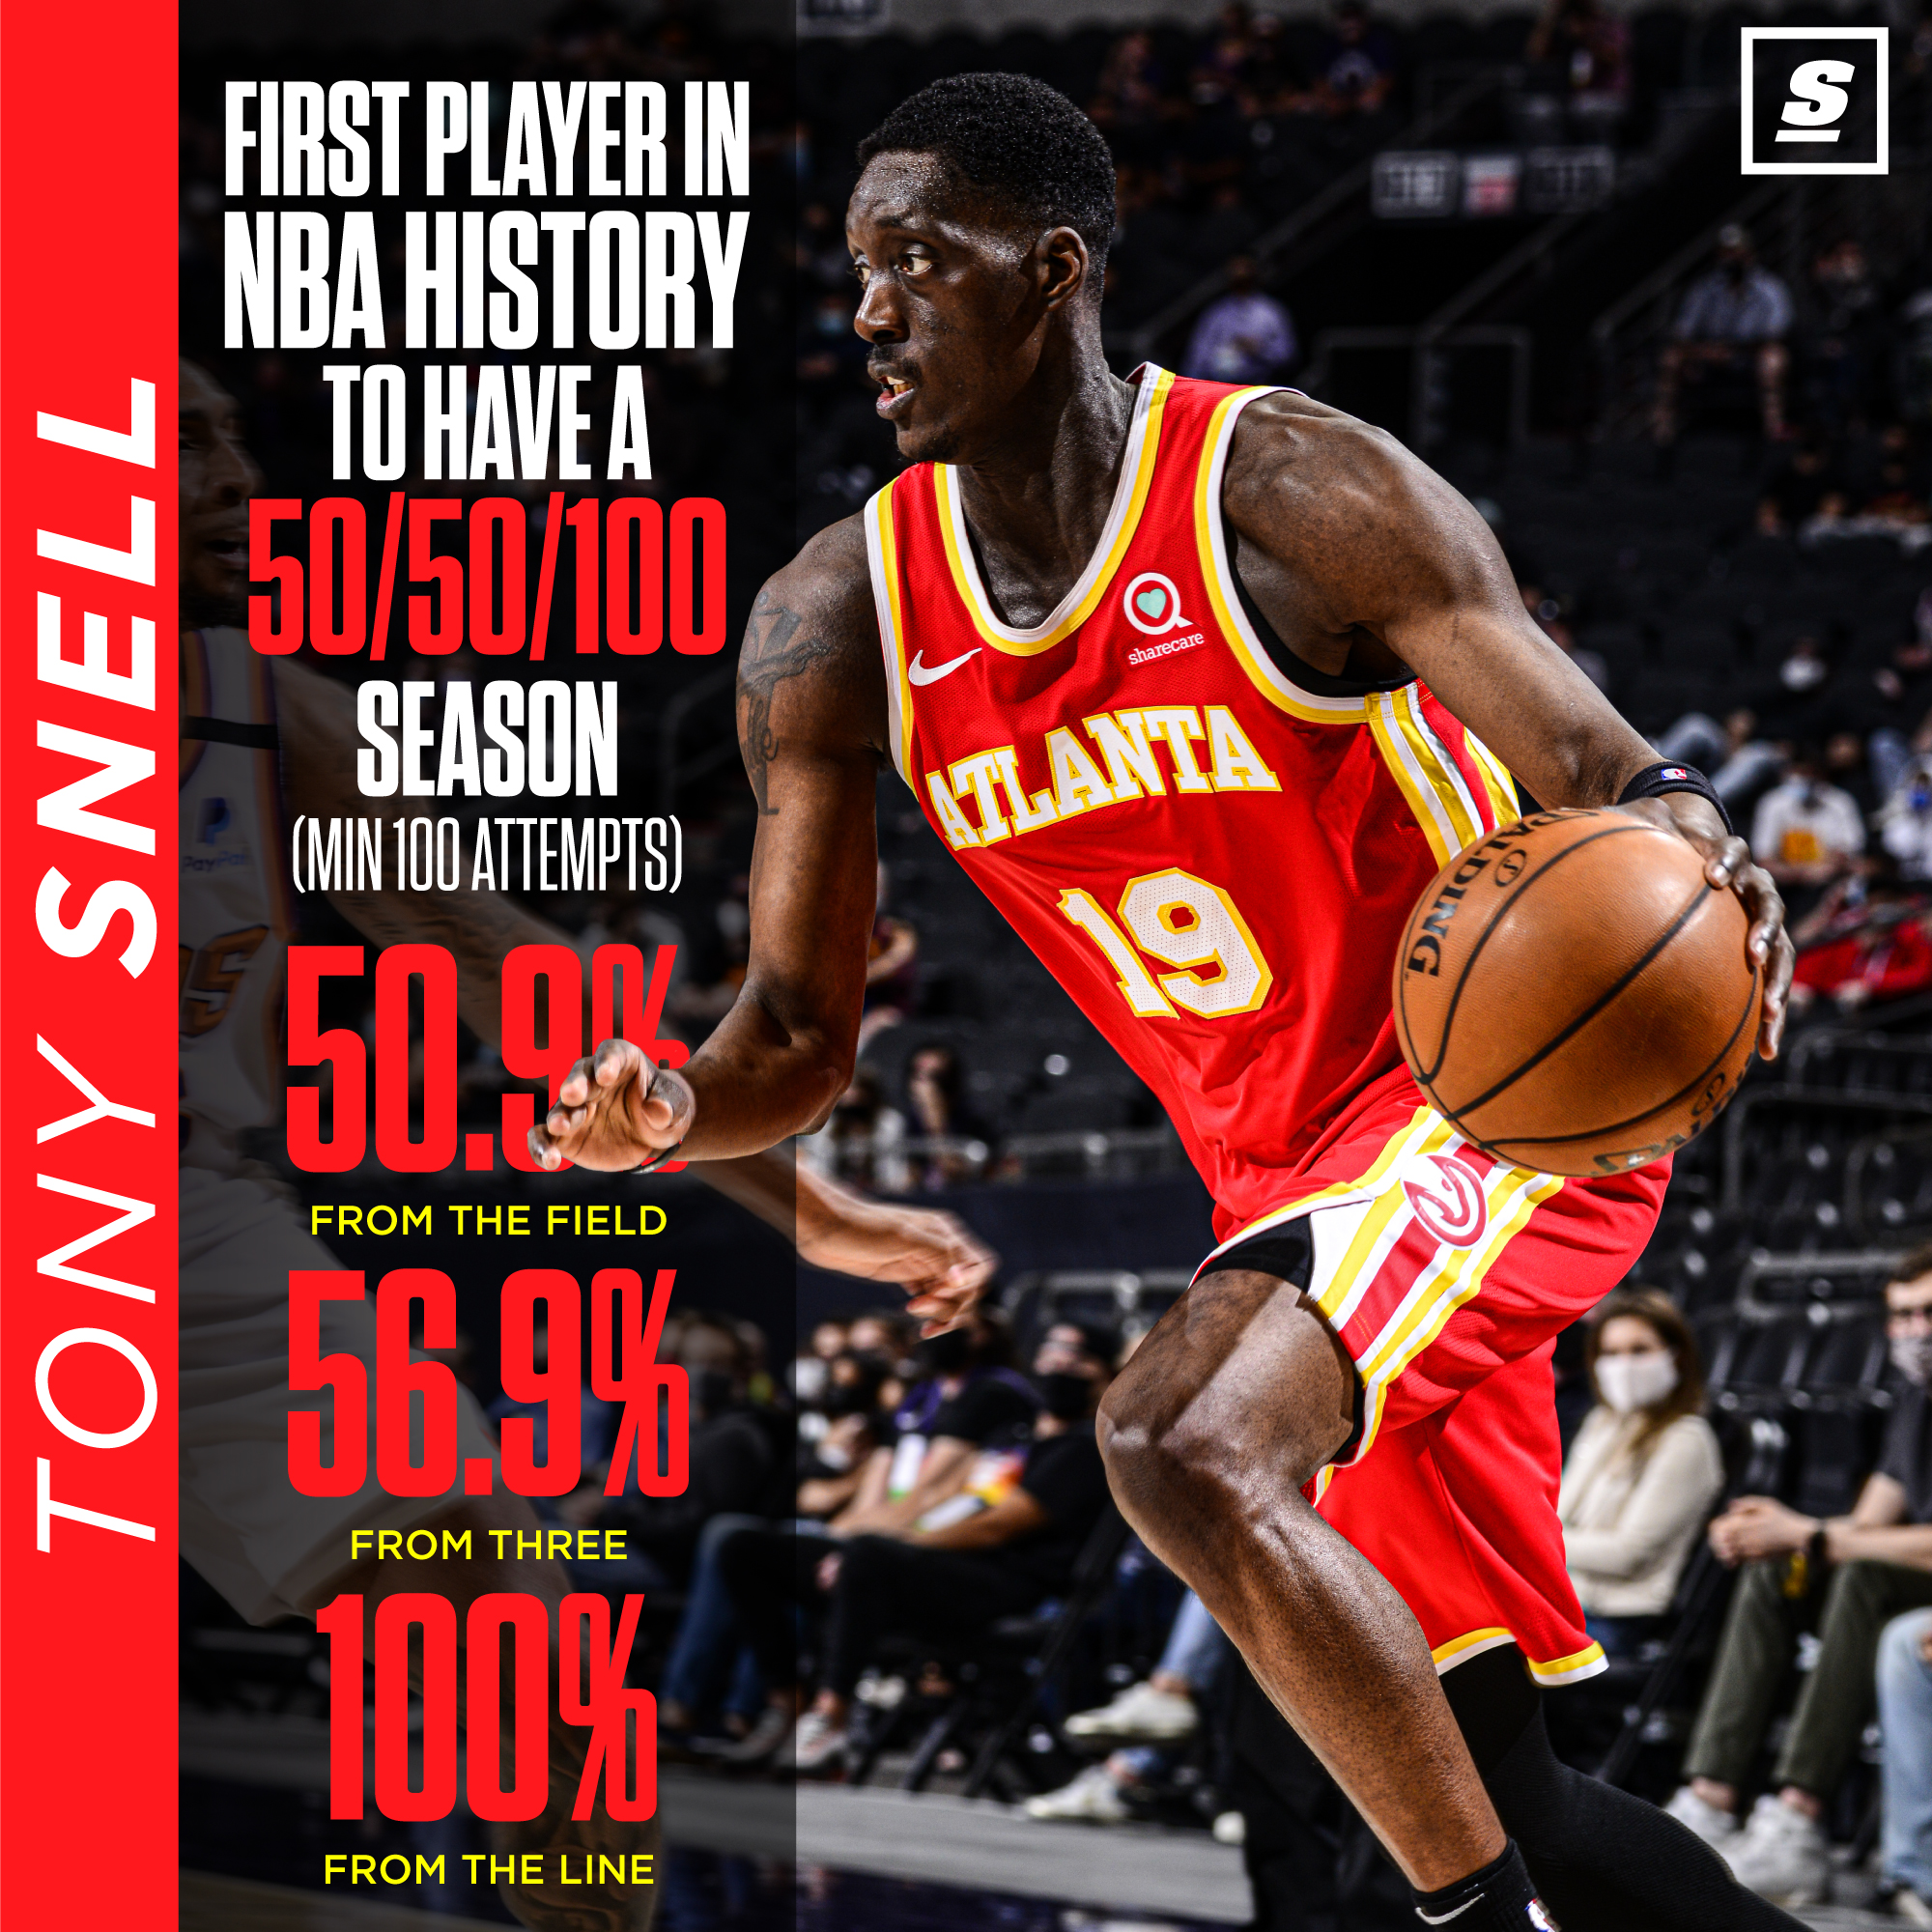 NBA Buzz - Tony Snell with another 'Cardio Hall of Fame